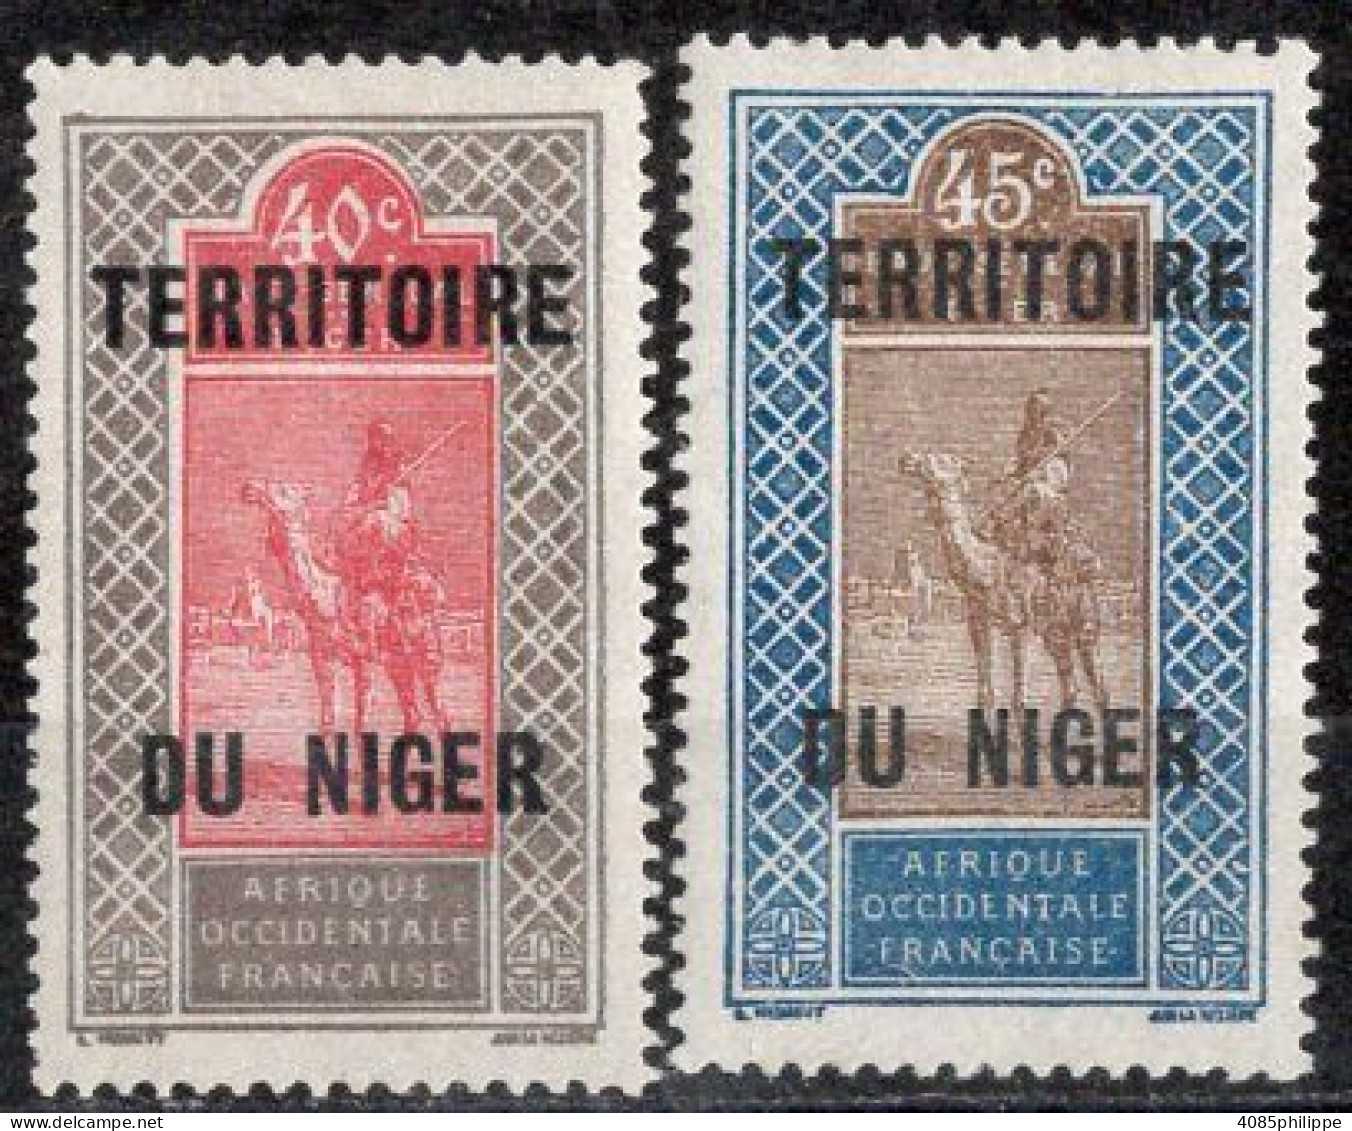 NIGER Timbres-poste N°11* & 12* Neufs Charnières TB Cote : 2€75 - Neufs